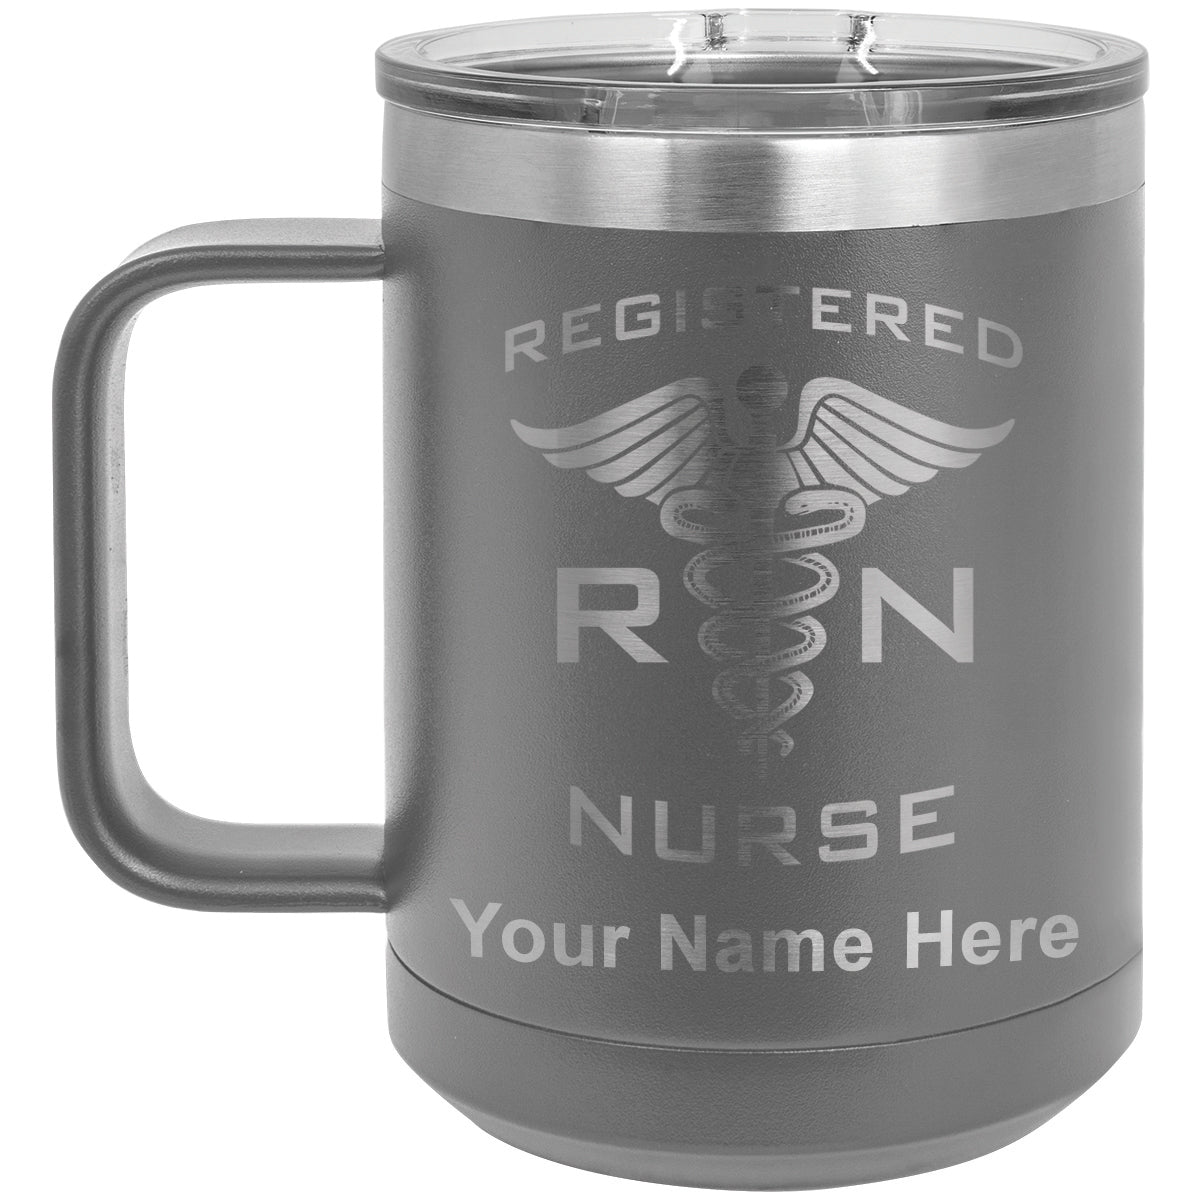 15oz Vacuum Insulated Coffee Mug, RN Registered Nurse, Personalized Engraving Included